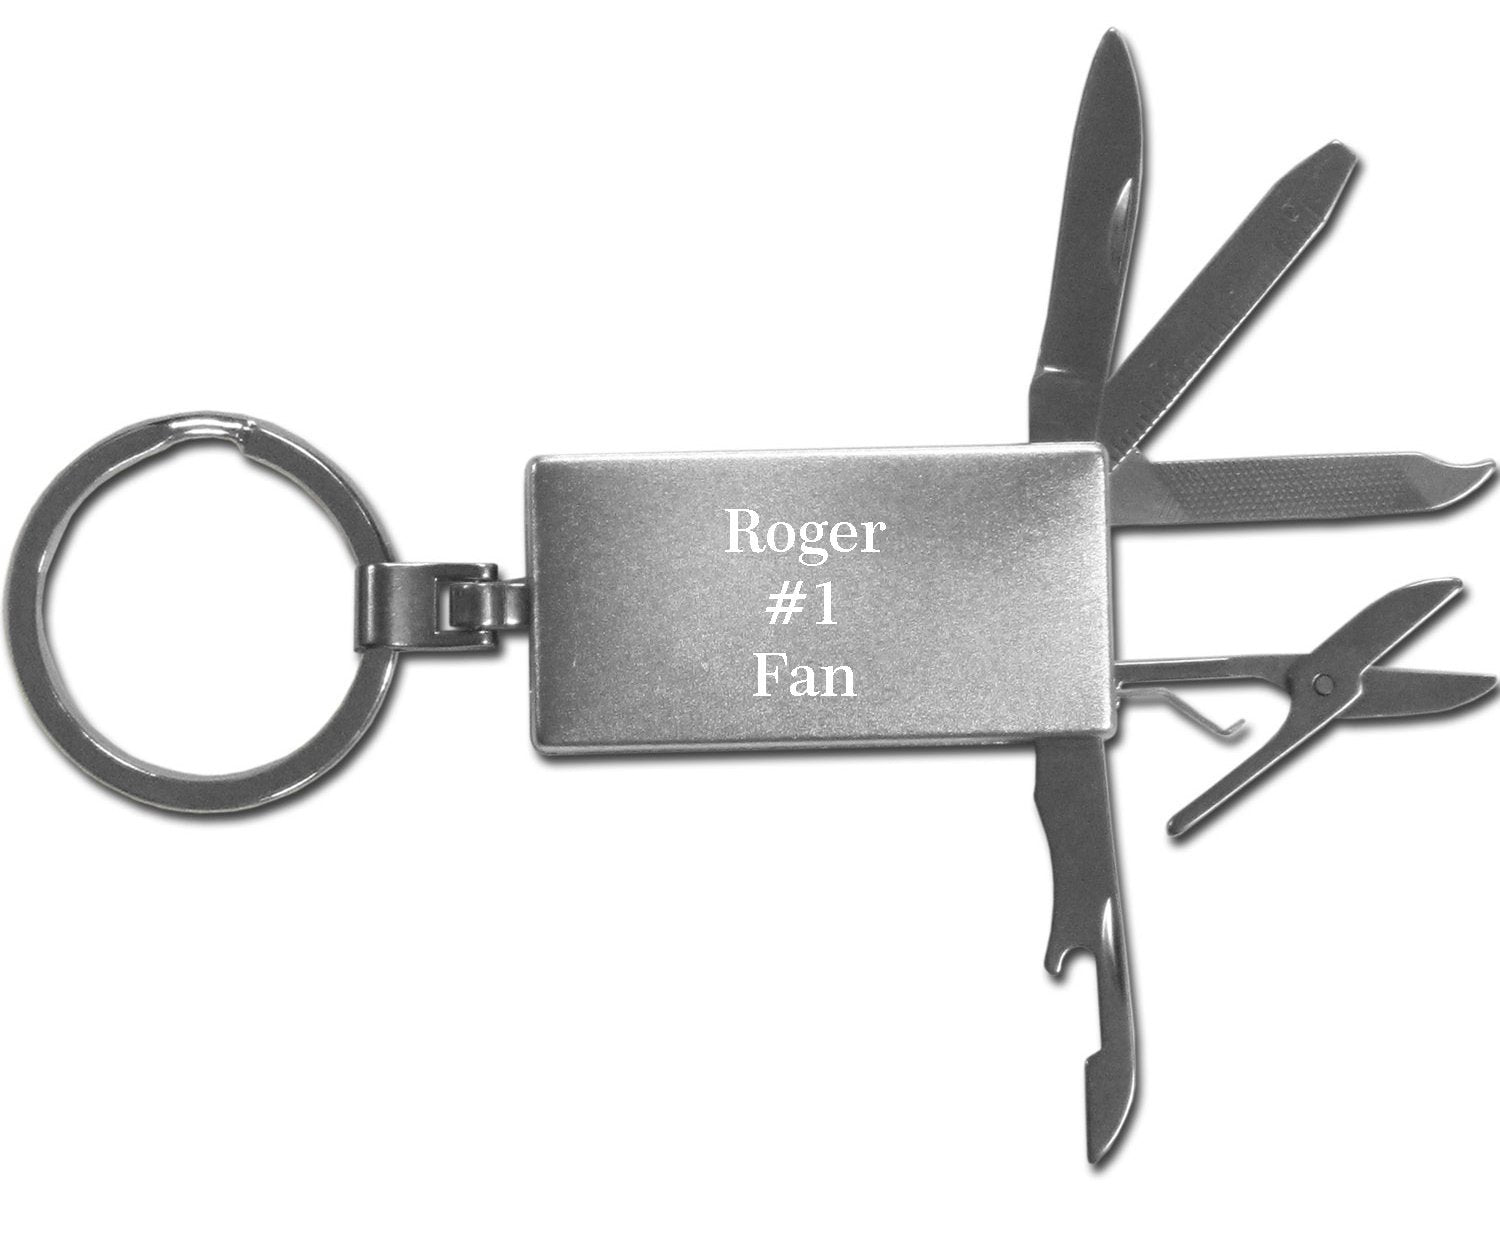 Cleveland Browns Multi-tool Key Chain